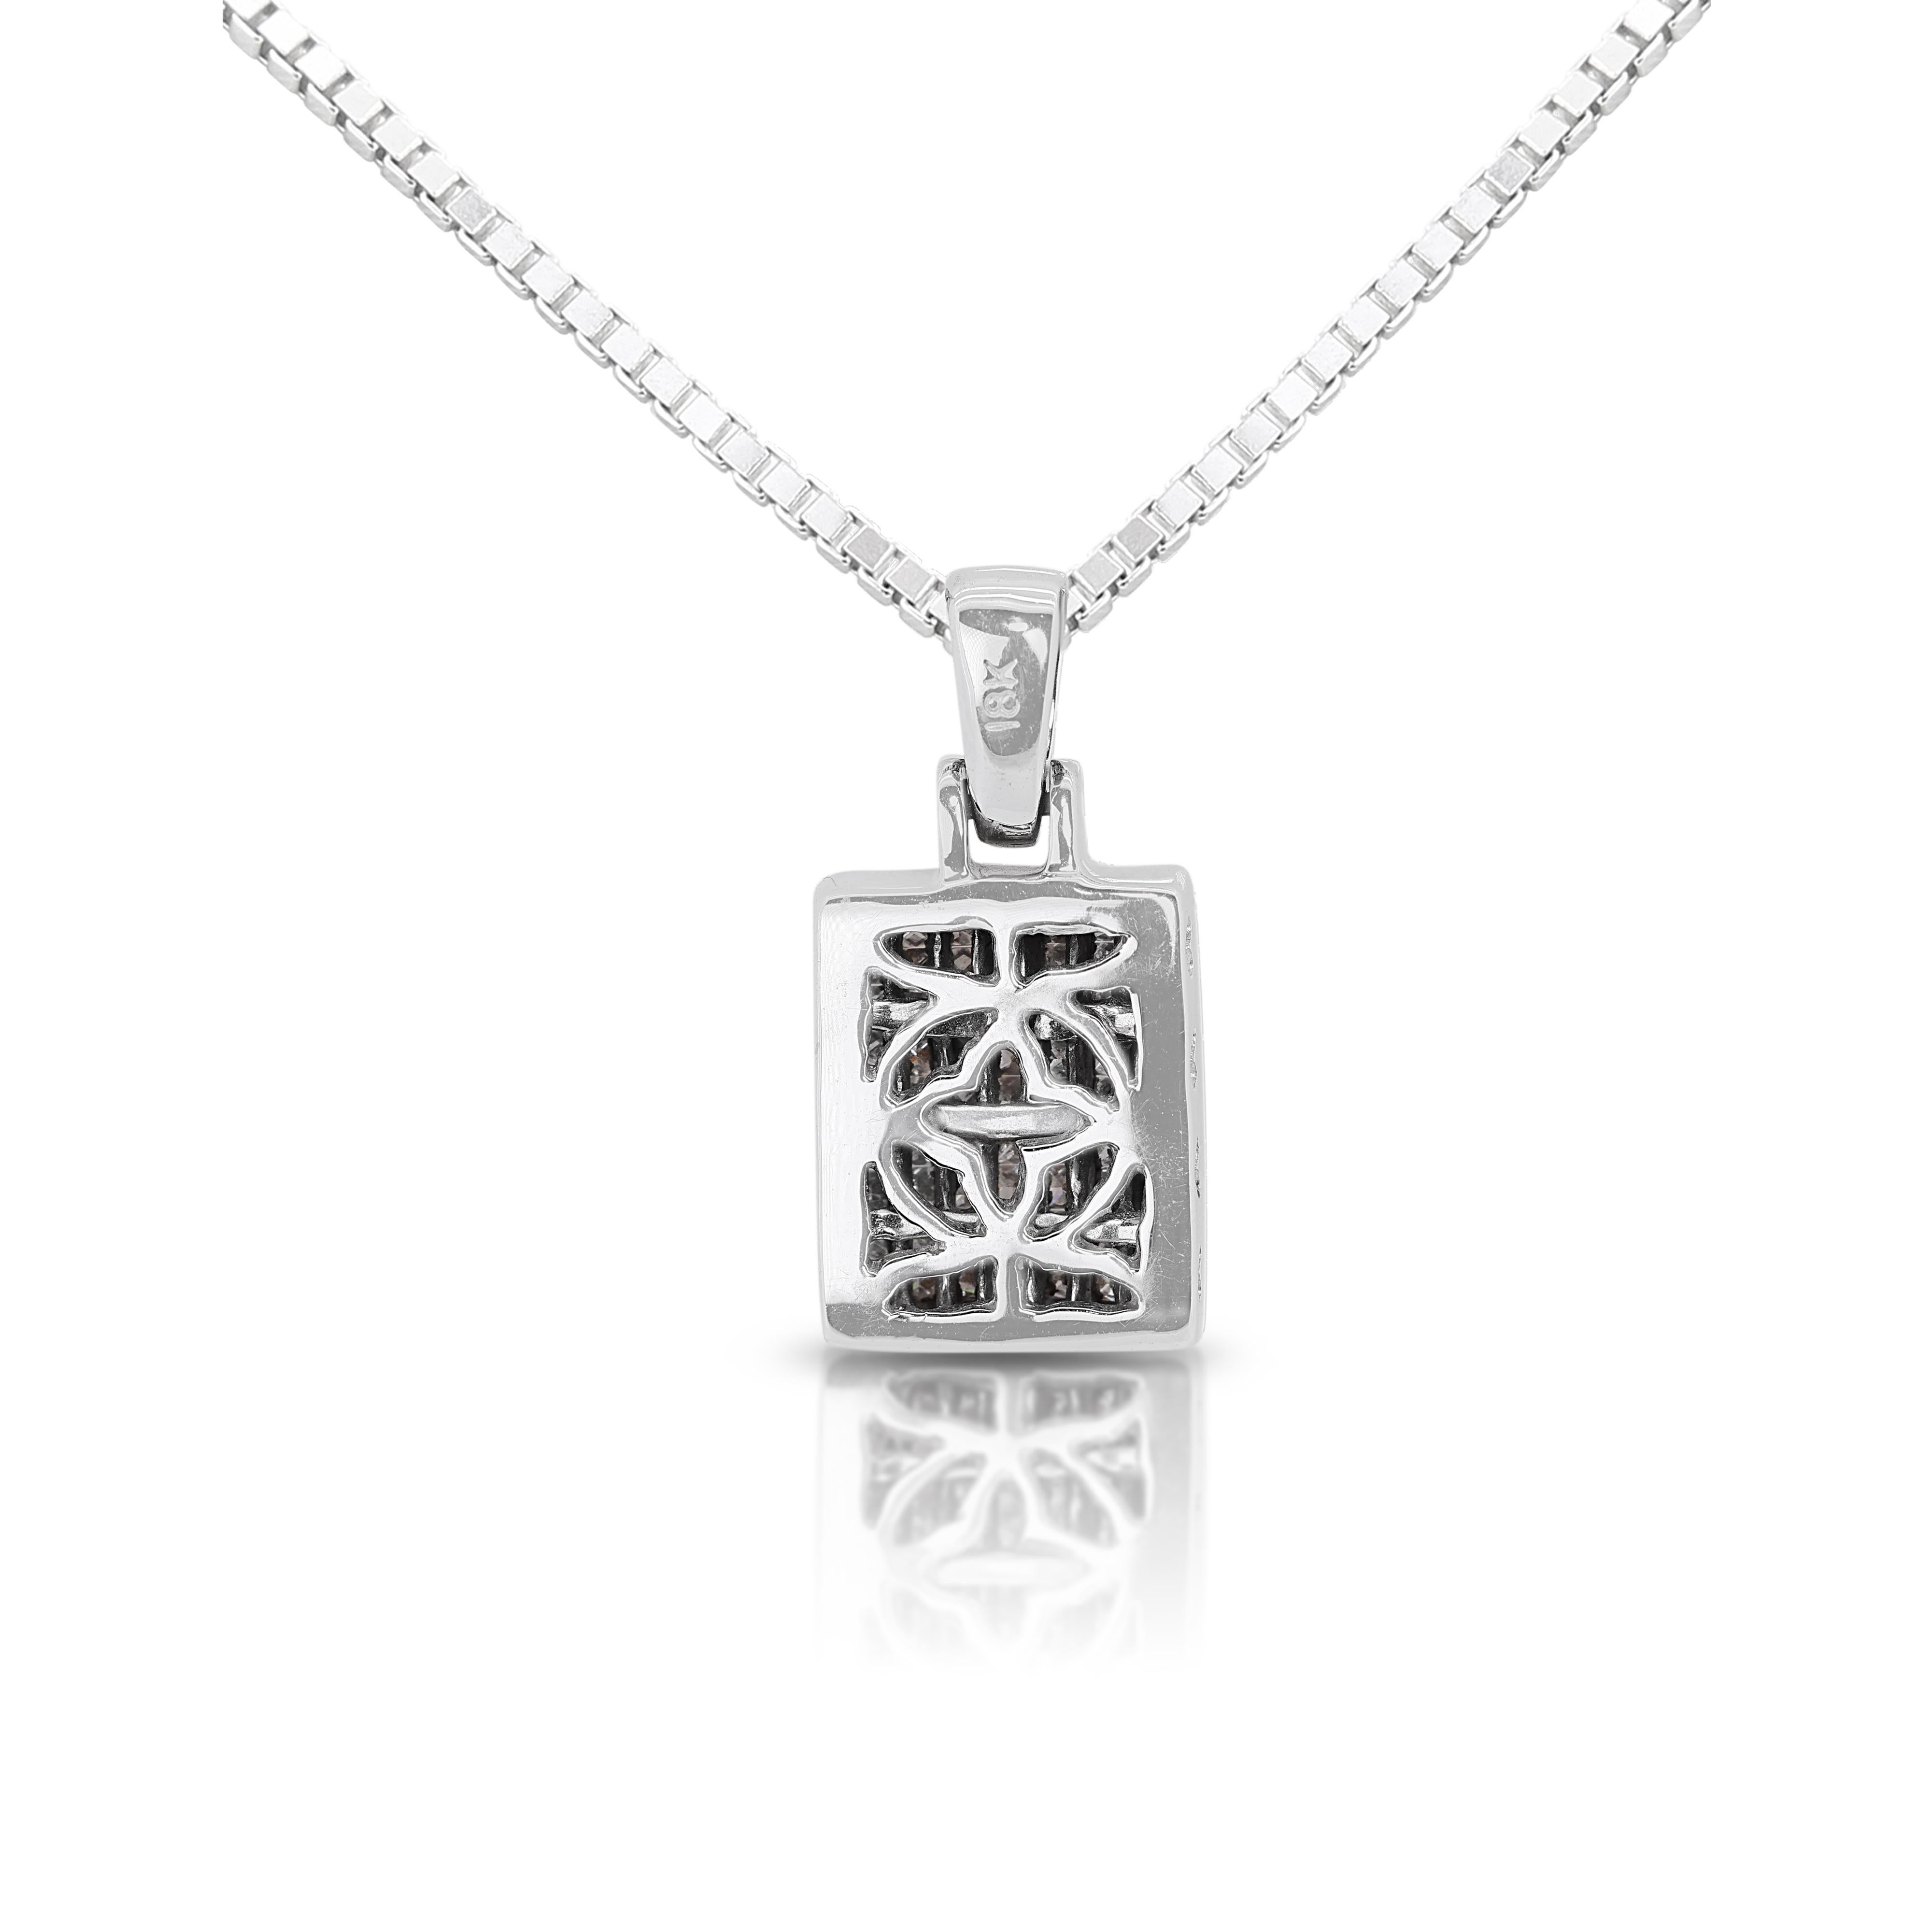 Dazzling 0.63ct Diamonds Pendant in 18K White Gold - (Chain Not Included) For Sale 1